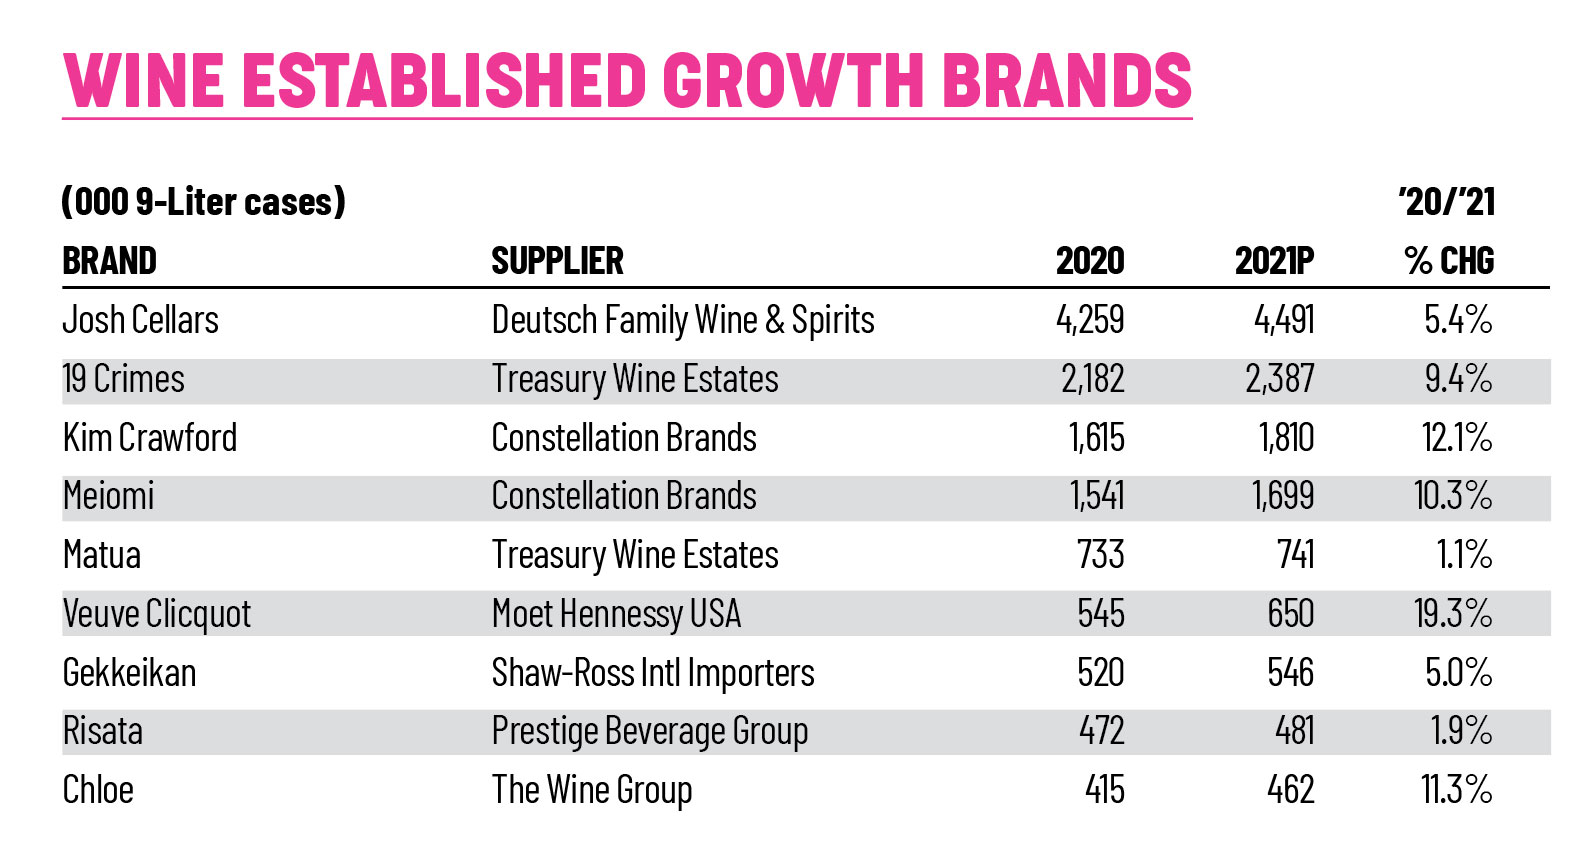 The 2022 Wine Growth Brands Awards